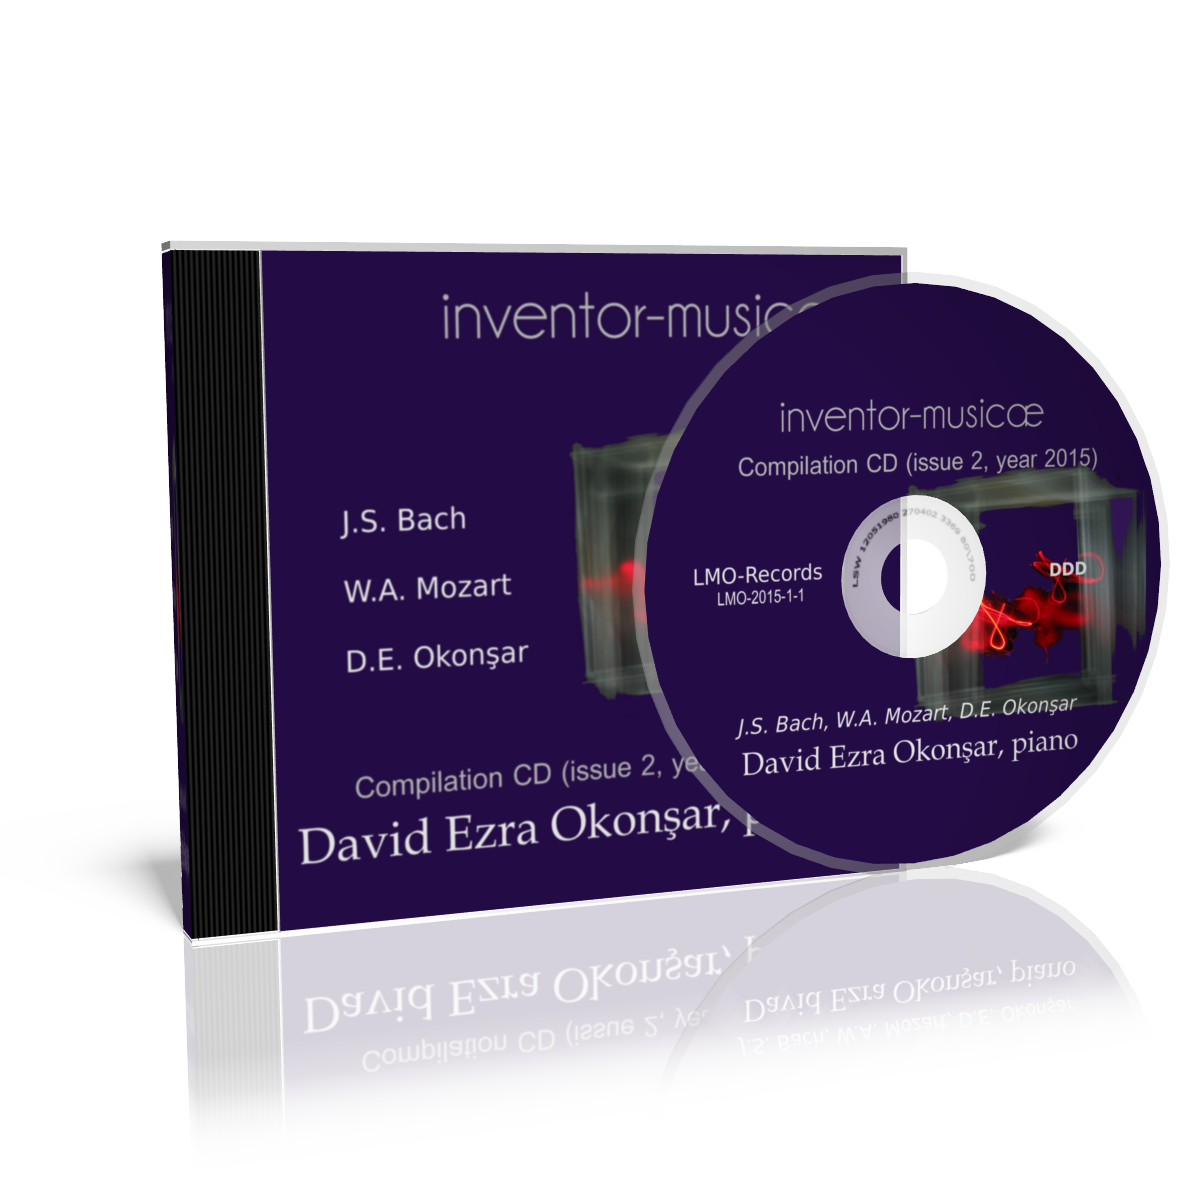 CDCovers/Inventor-Musicae_ProductImage-1.png